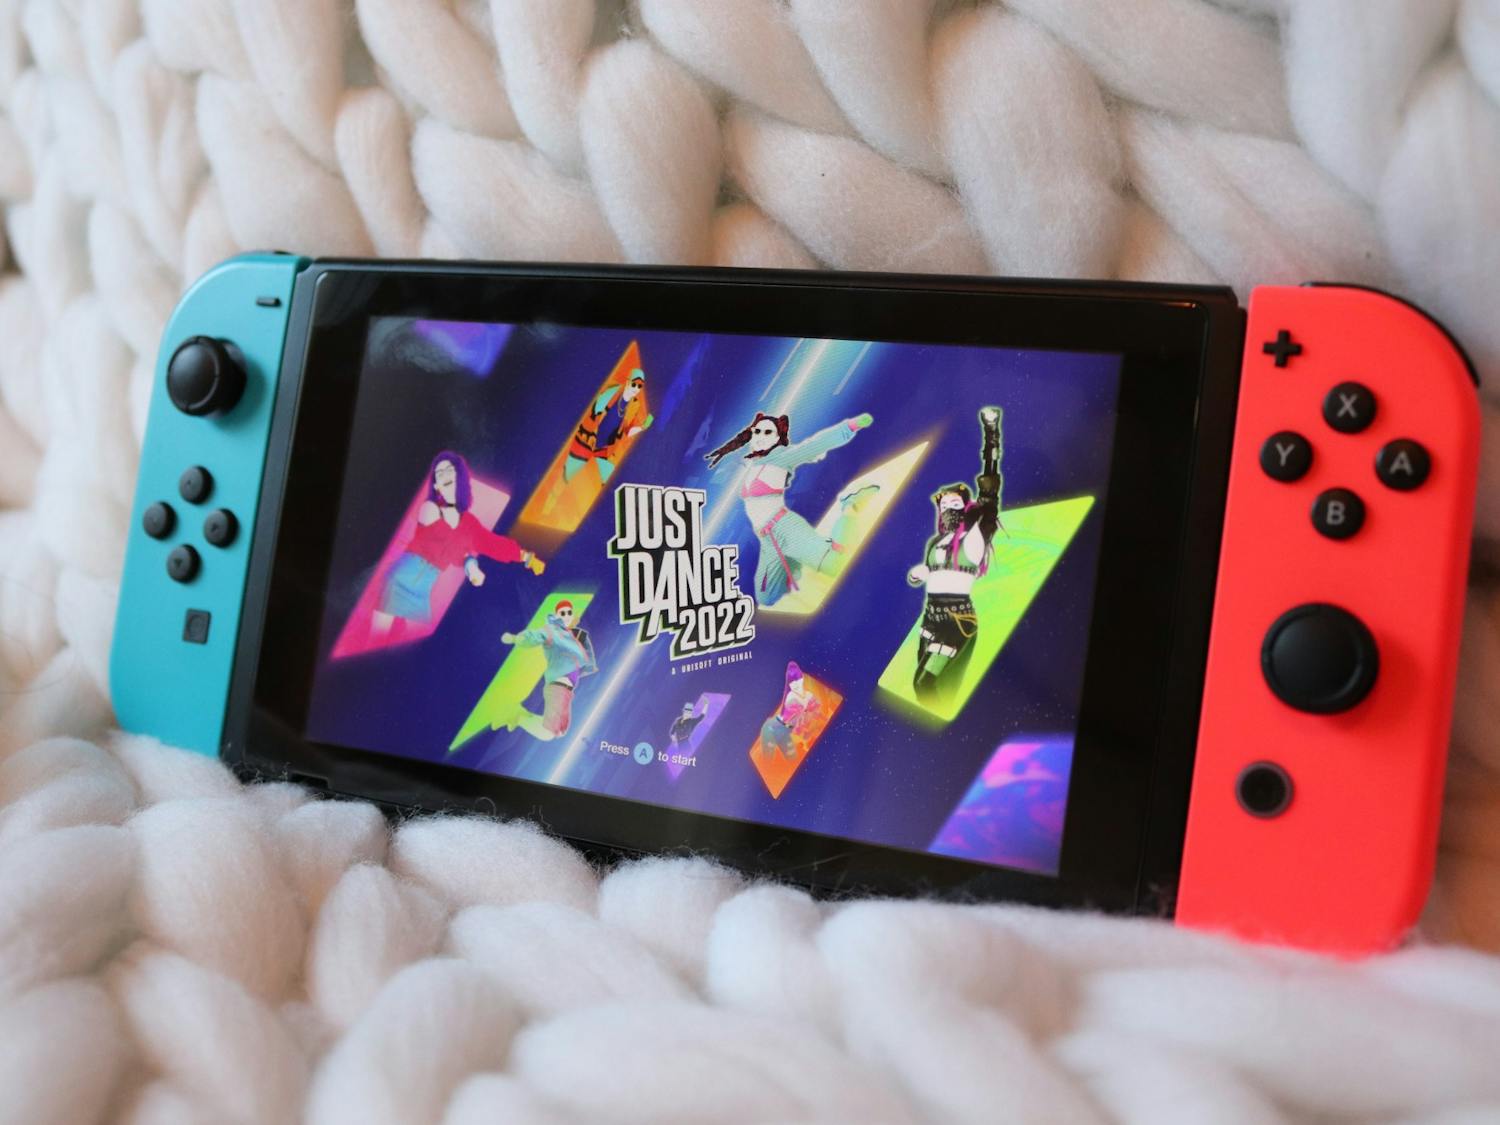 "Just Dance 2022" was released Nov. 4, 2021, as the 13th installment in the "Just Dance" game series. The game can be played on the Nintendo Switch and iterations of the Xbox and PlayStation consoles.